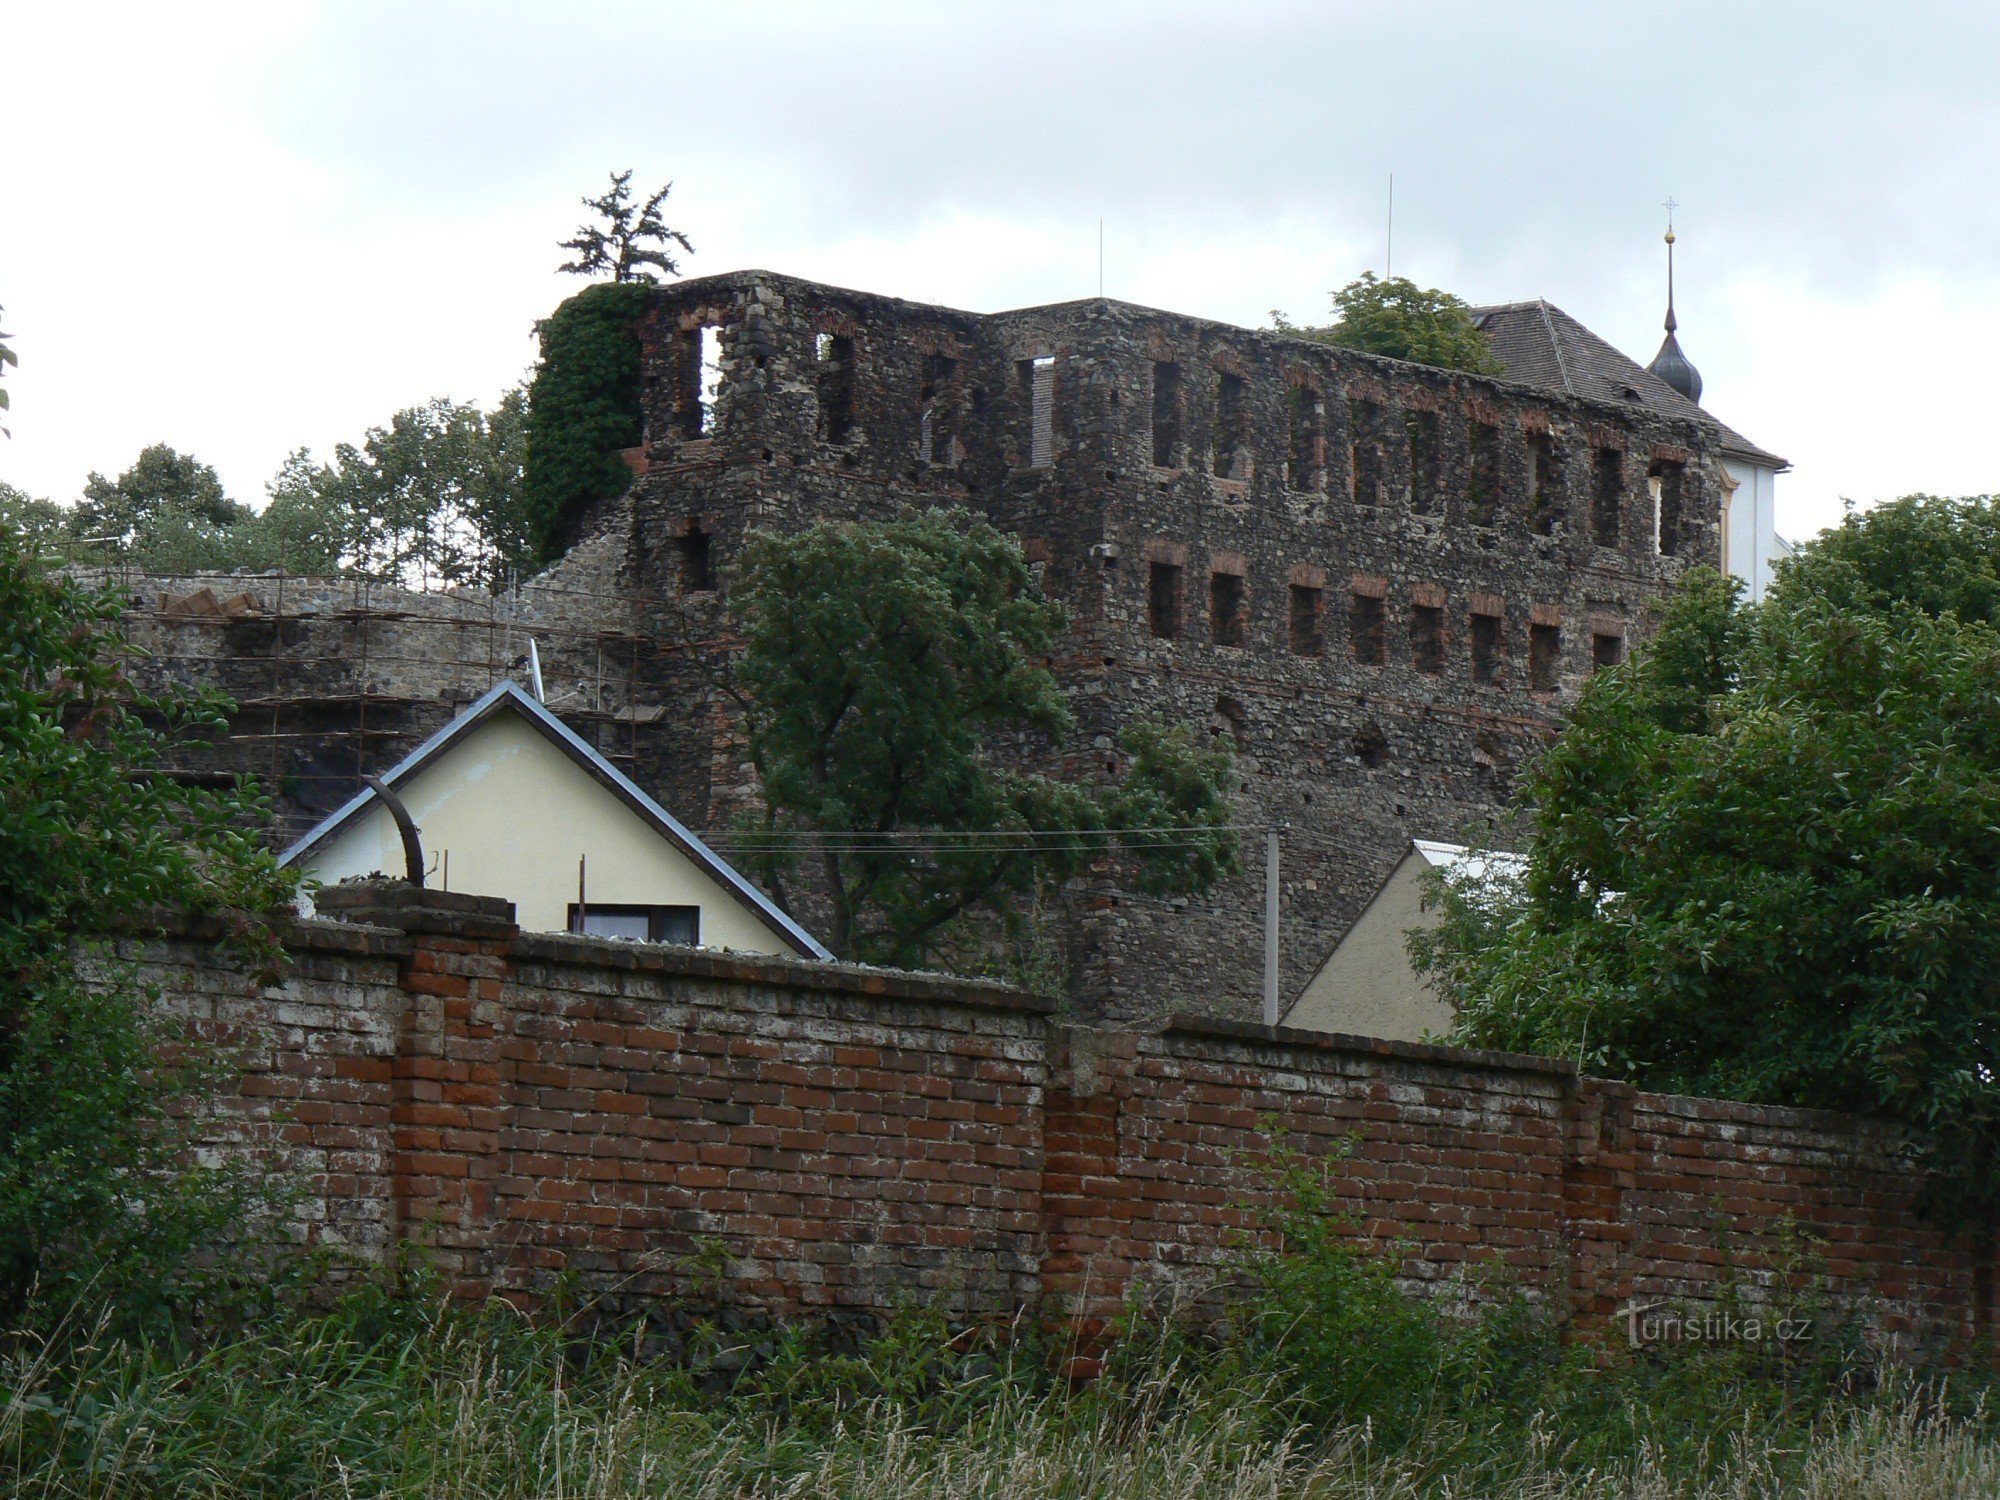 The fortress in Chvatěruby